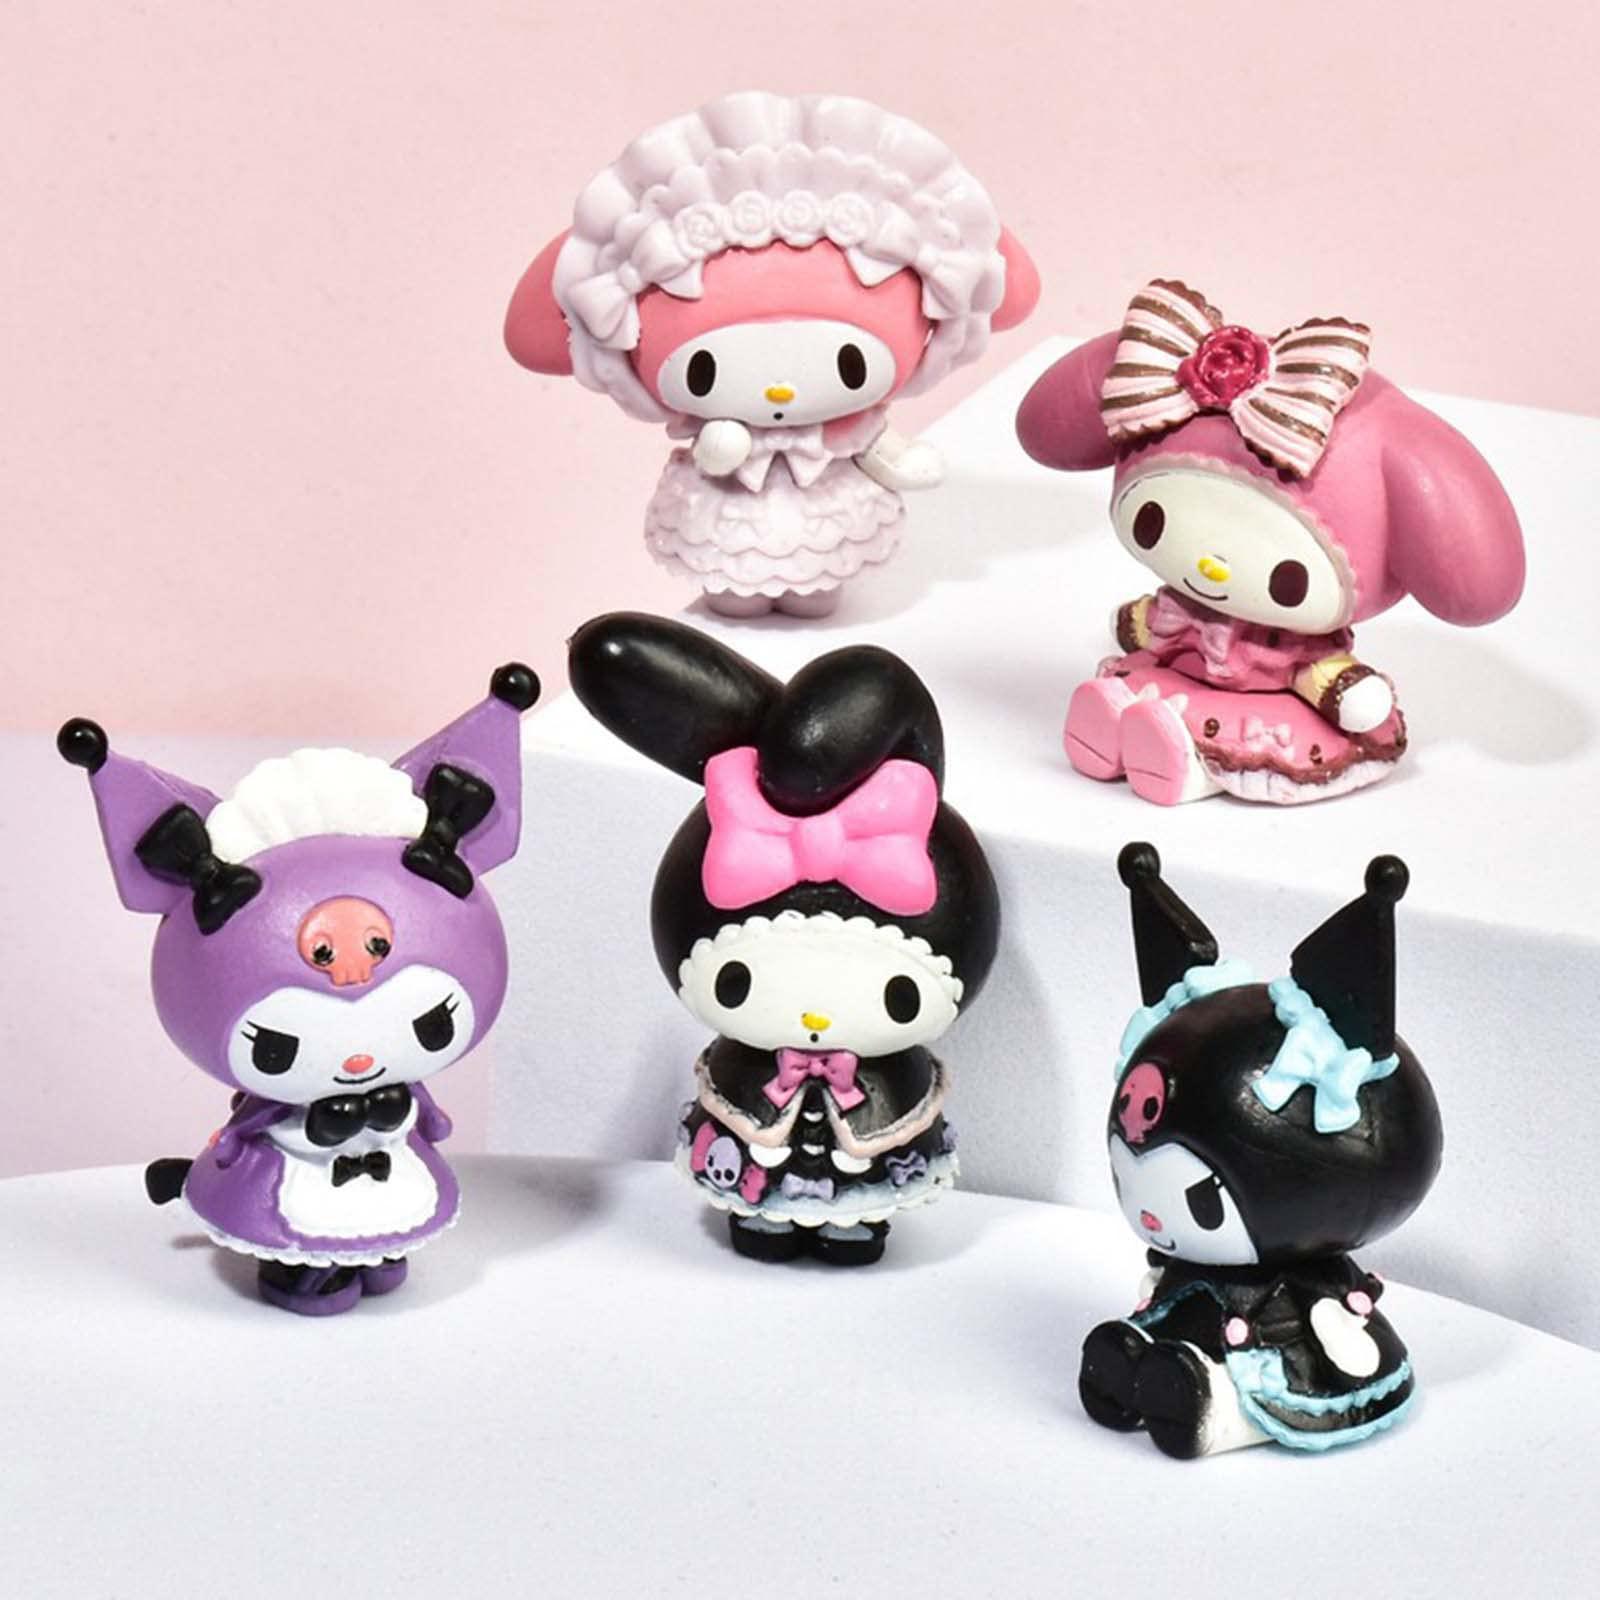 afupgb 2022 new super cute anime figures, mini cartoon anime characters  toys, pvc model figurines collection